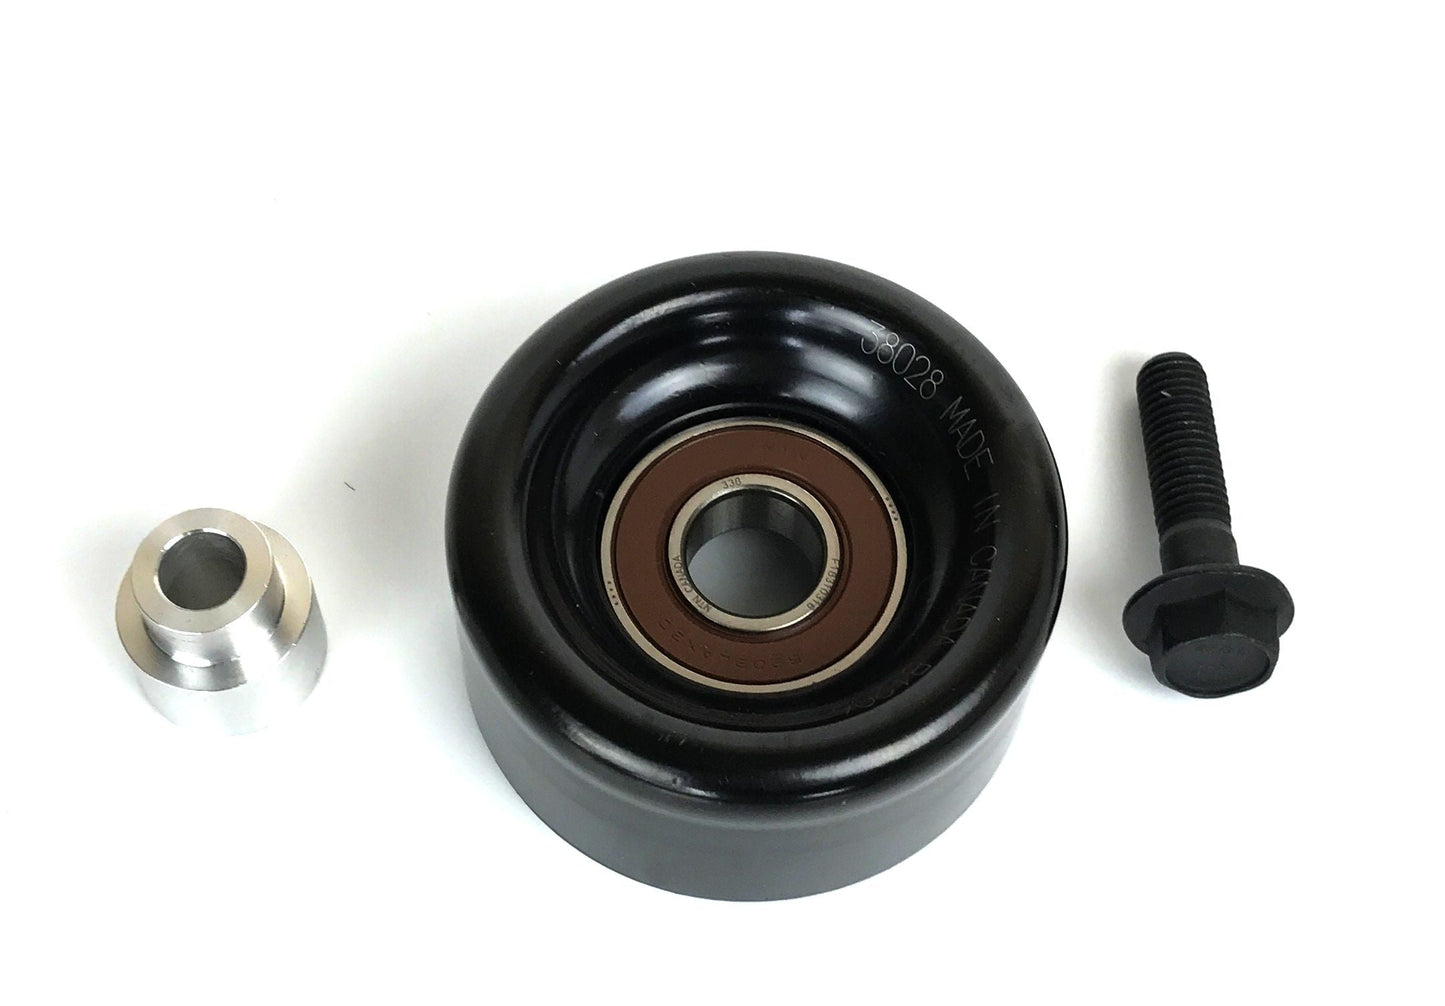 Fleece Cummins Dual Pump Idler Pulley, Spacer, and Bolt (For use with FPE-34022-PC & FPE-34610-PC)